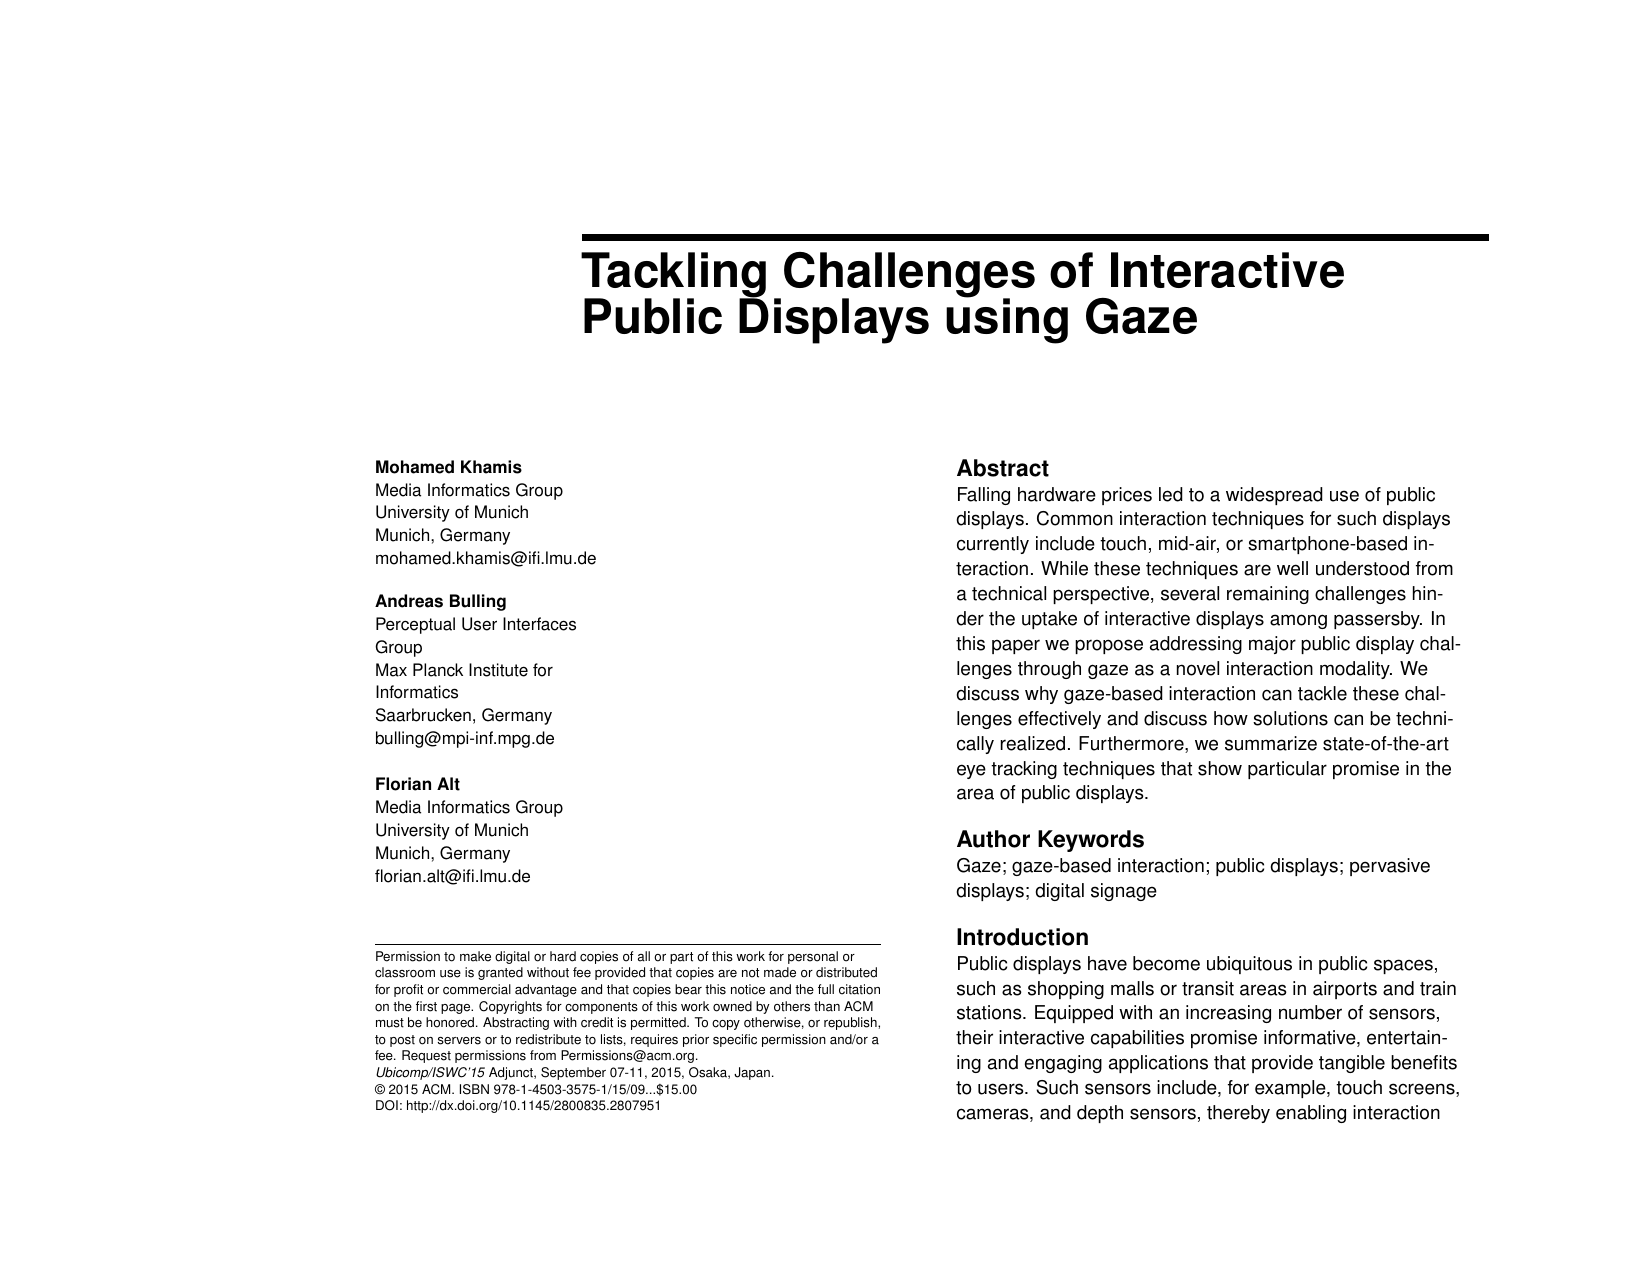 Tackling Challenges of Interactive Public Displays using Gaze